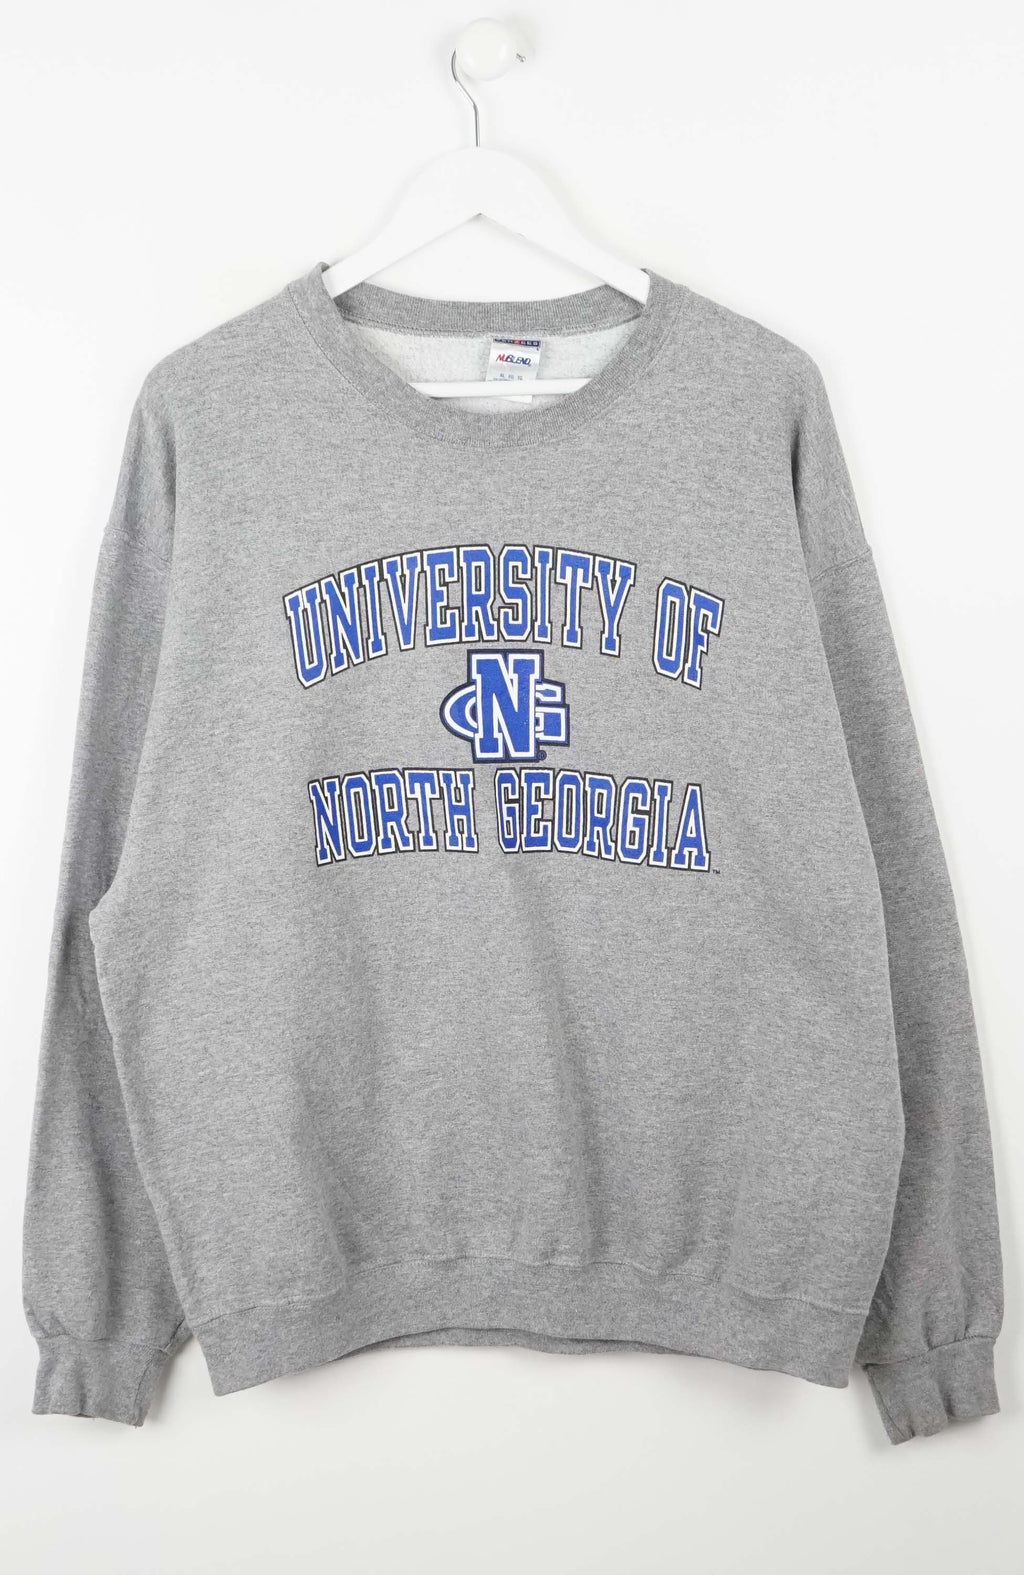 VINTAGE UNIVERSITY OF NORTH GEOGIA SWEATER (L)